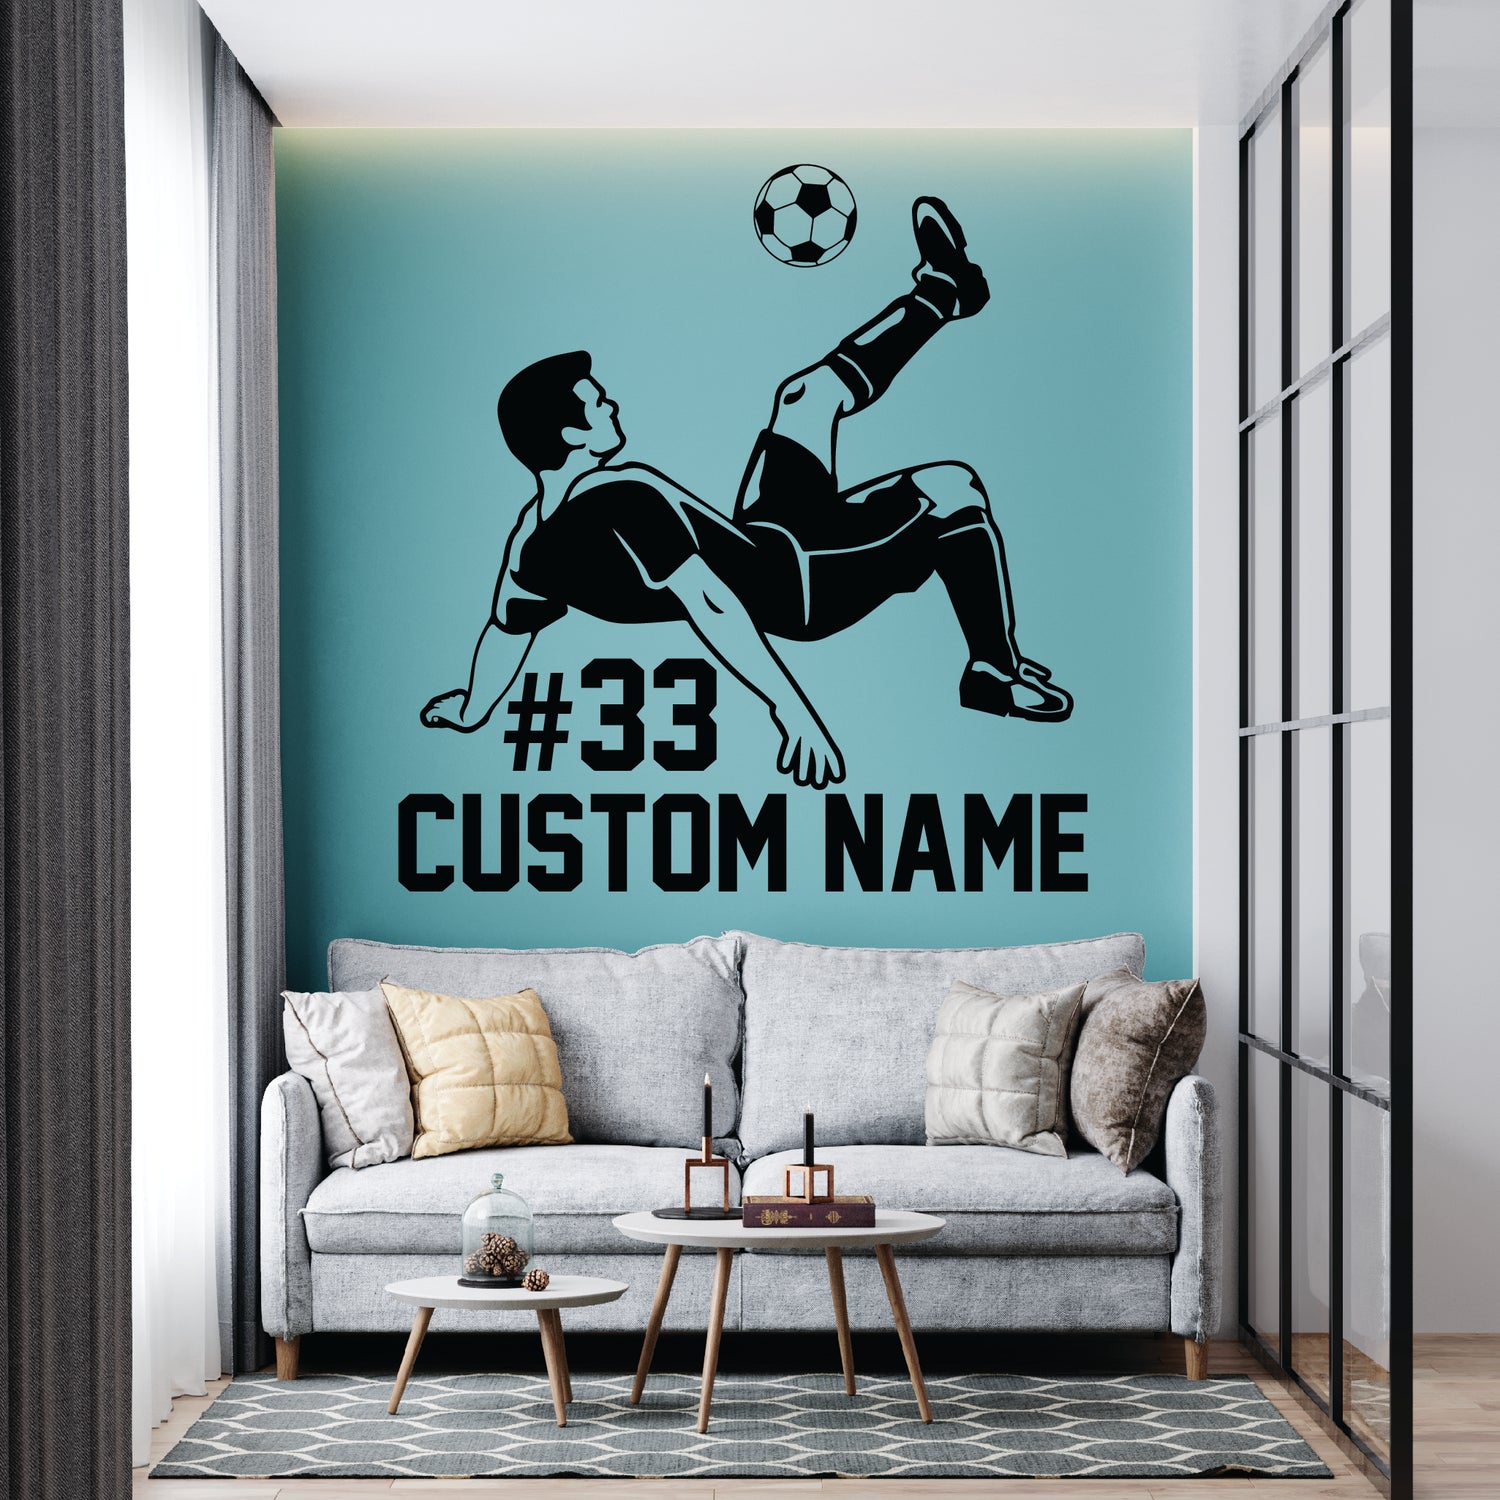 5 ALL SOCCER STICKERS